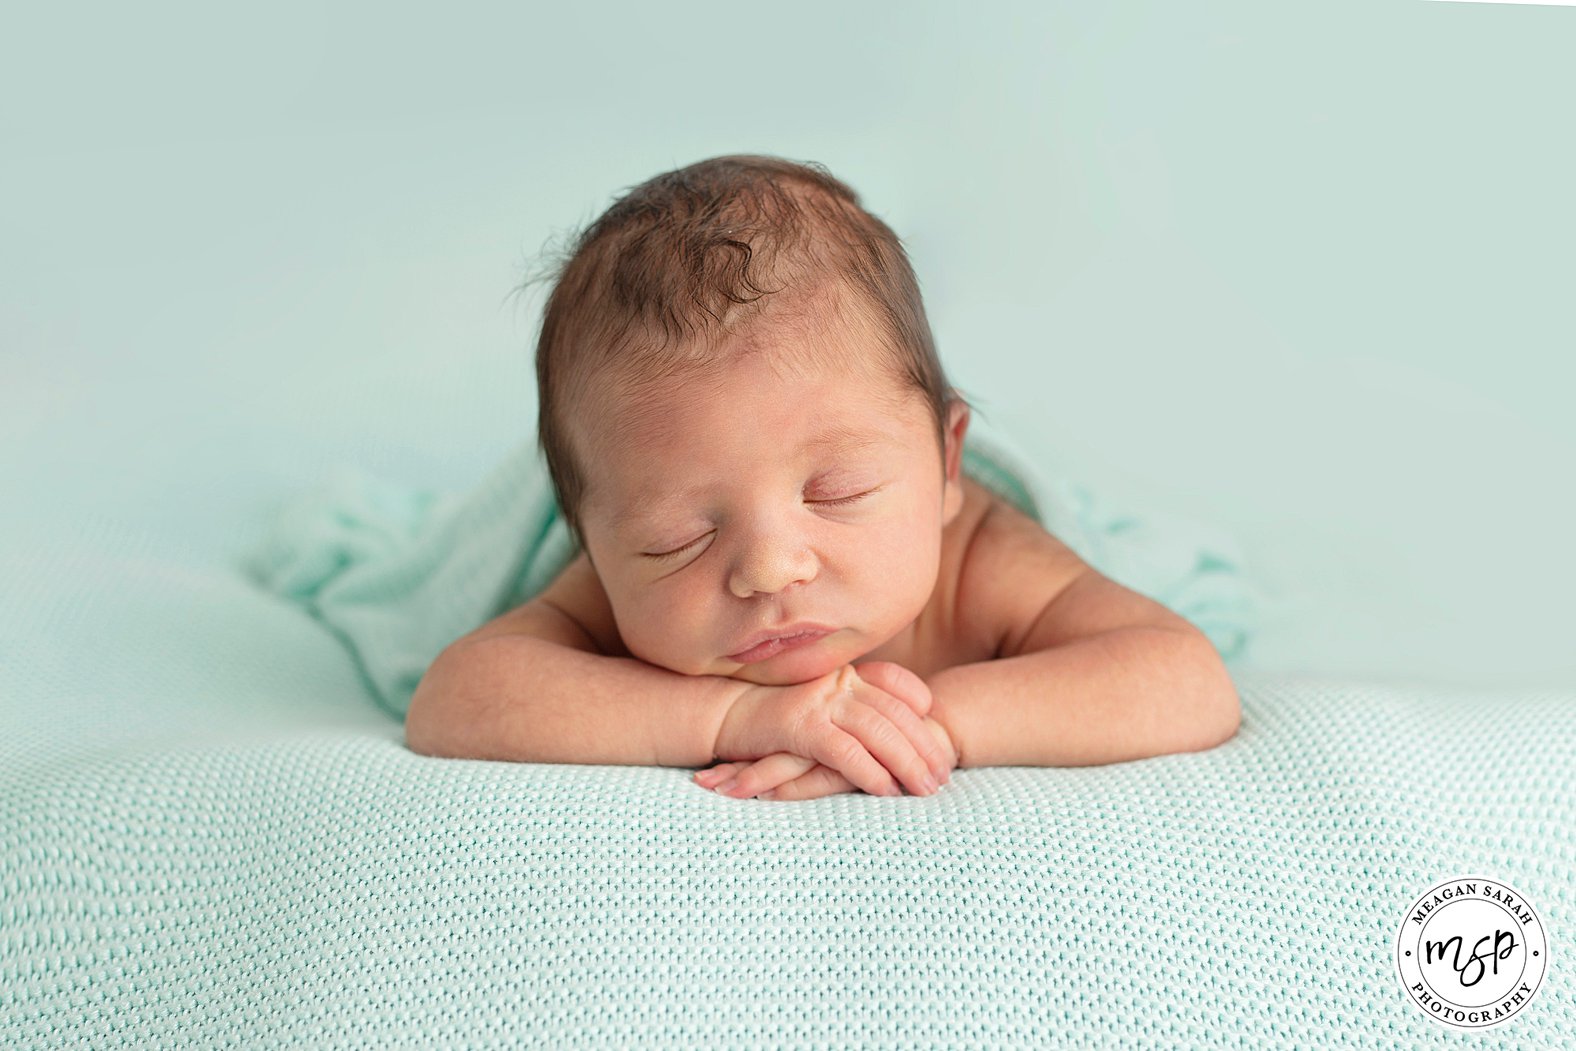 Turquoise,Baby Photographer Leeds,Baby Photography Leeds,Leeds Newborn Photographer,Leeds Newborn Photography,Leeds Photographer,Professional Photographer in Leeds,West Yorkshire Photographer,Yorkshire Newborn Photographer,Yorkshire Newborn Photography,Front,